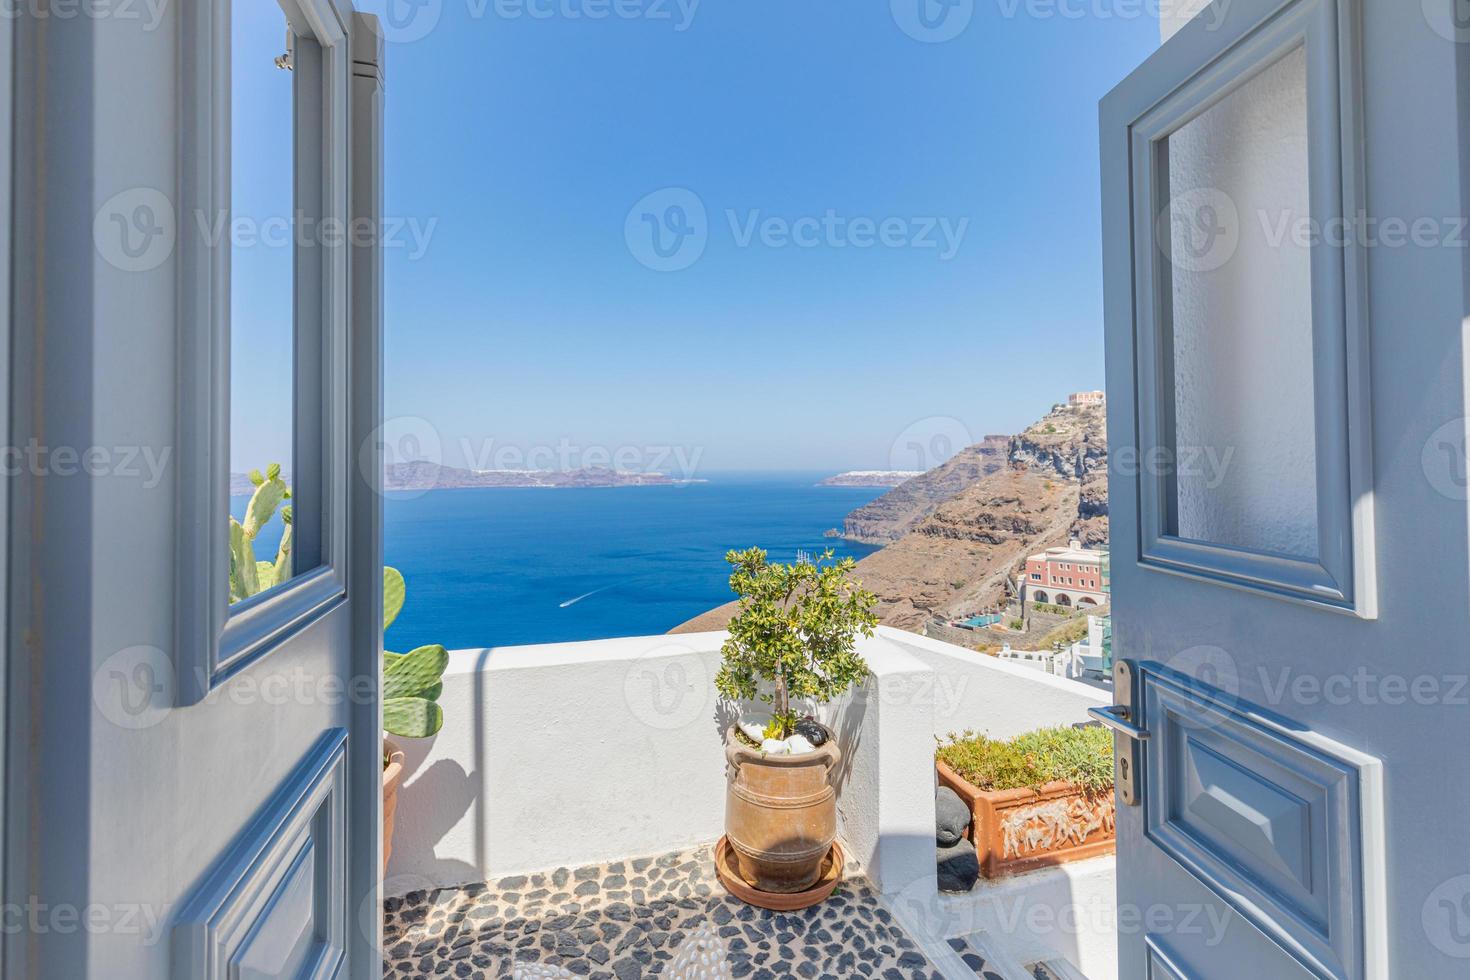 Fantastic travel background, Santorini urban street landscape. Blue door or gate stairs and white architecture under sunny sky. Amazing summer vacation holiday adventure. Wonderful summer luxury vibes photo